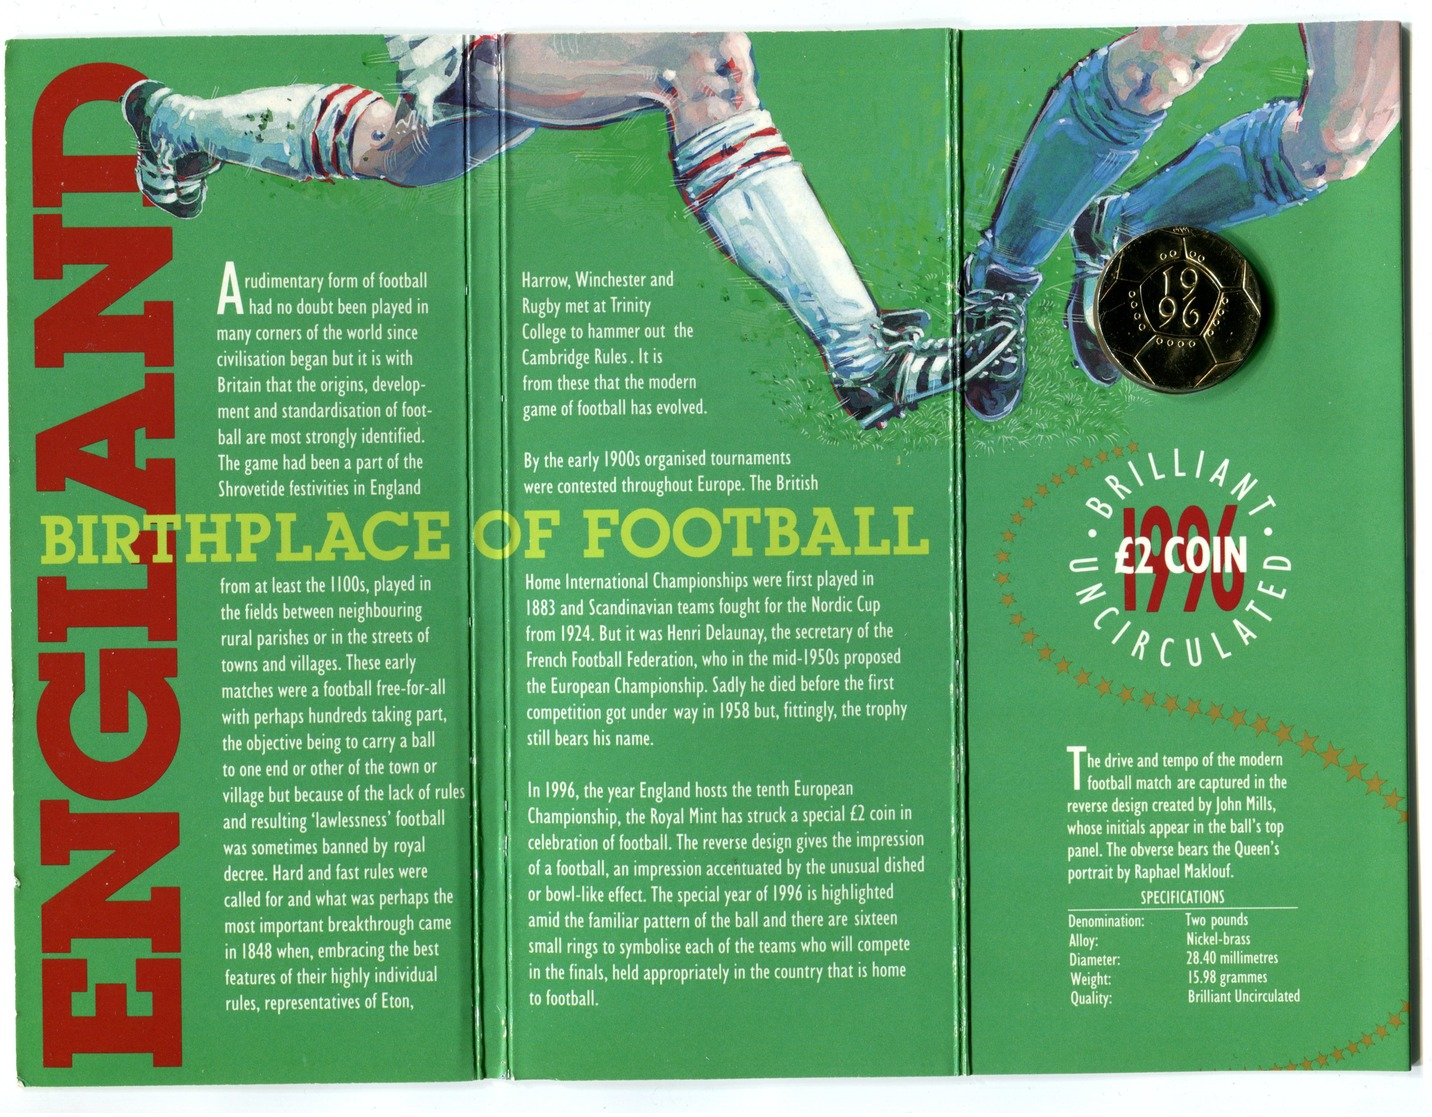 1996 United Kingdom Brilliant Uncirculated 2 Pound Football Coin - Maundy Sets & Commemorative